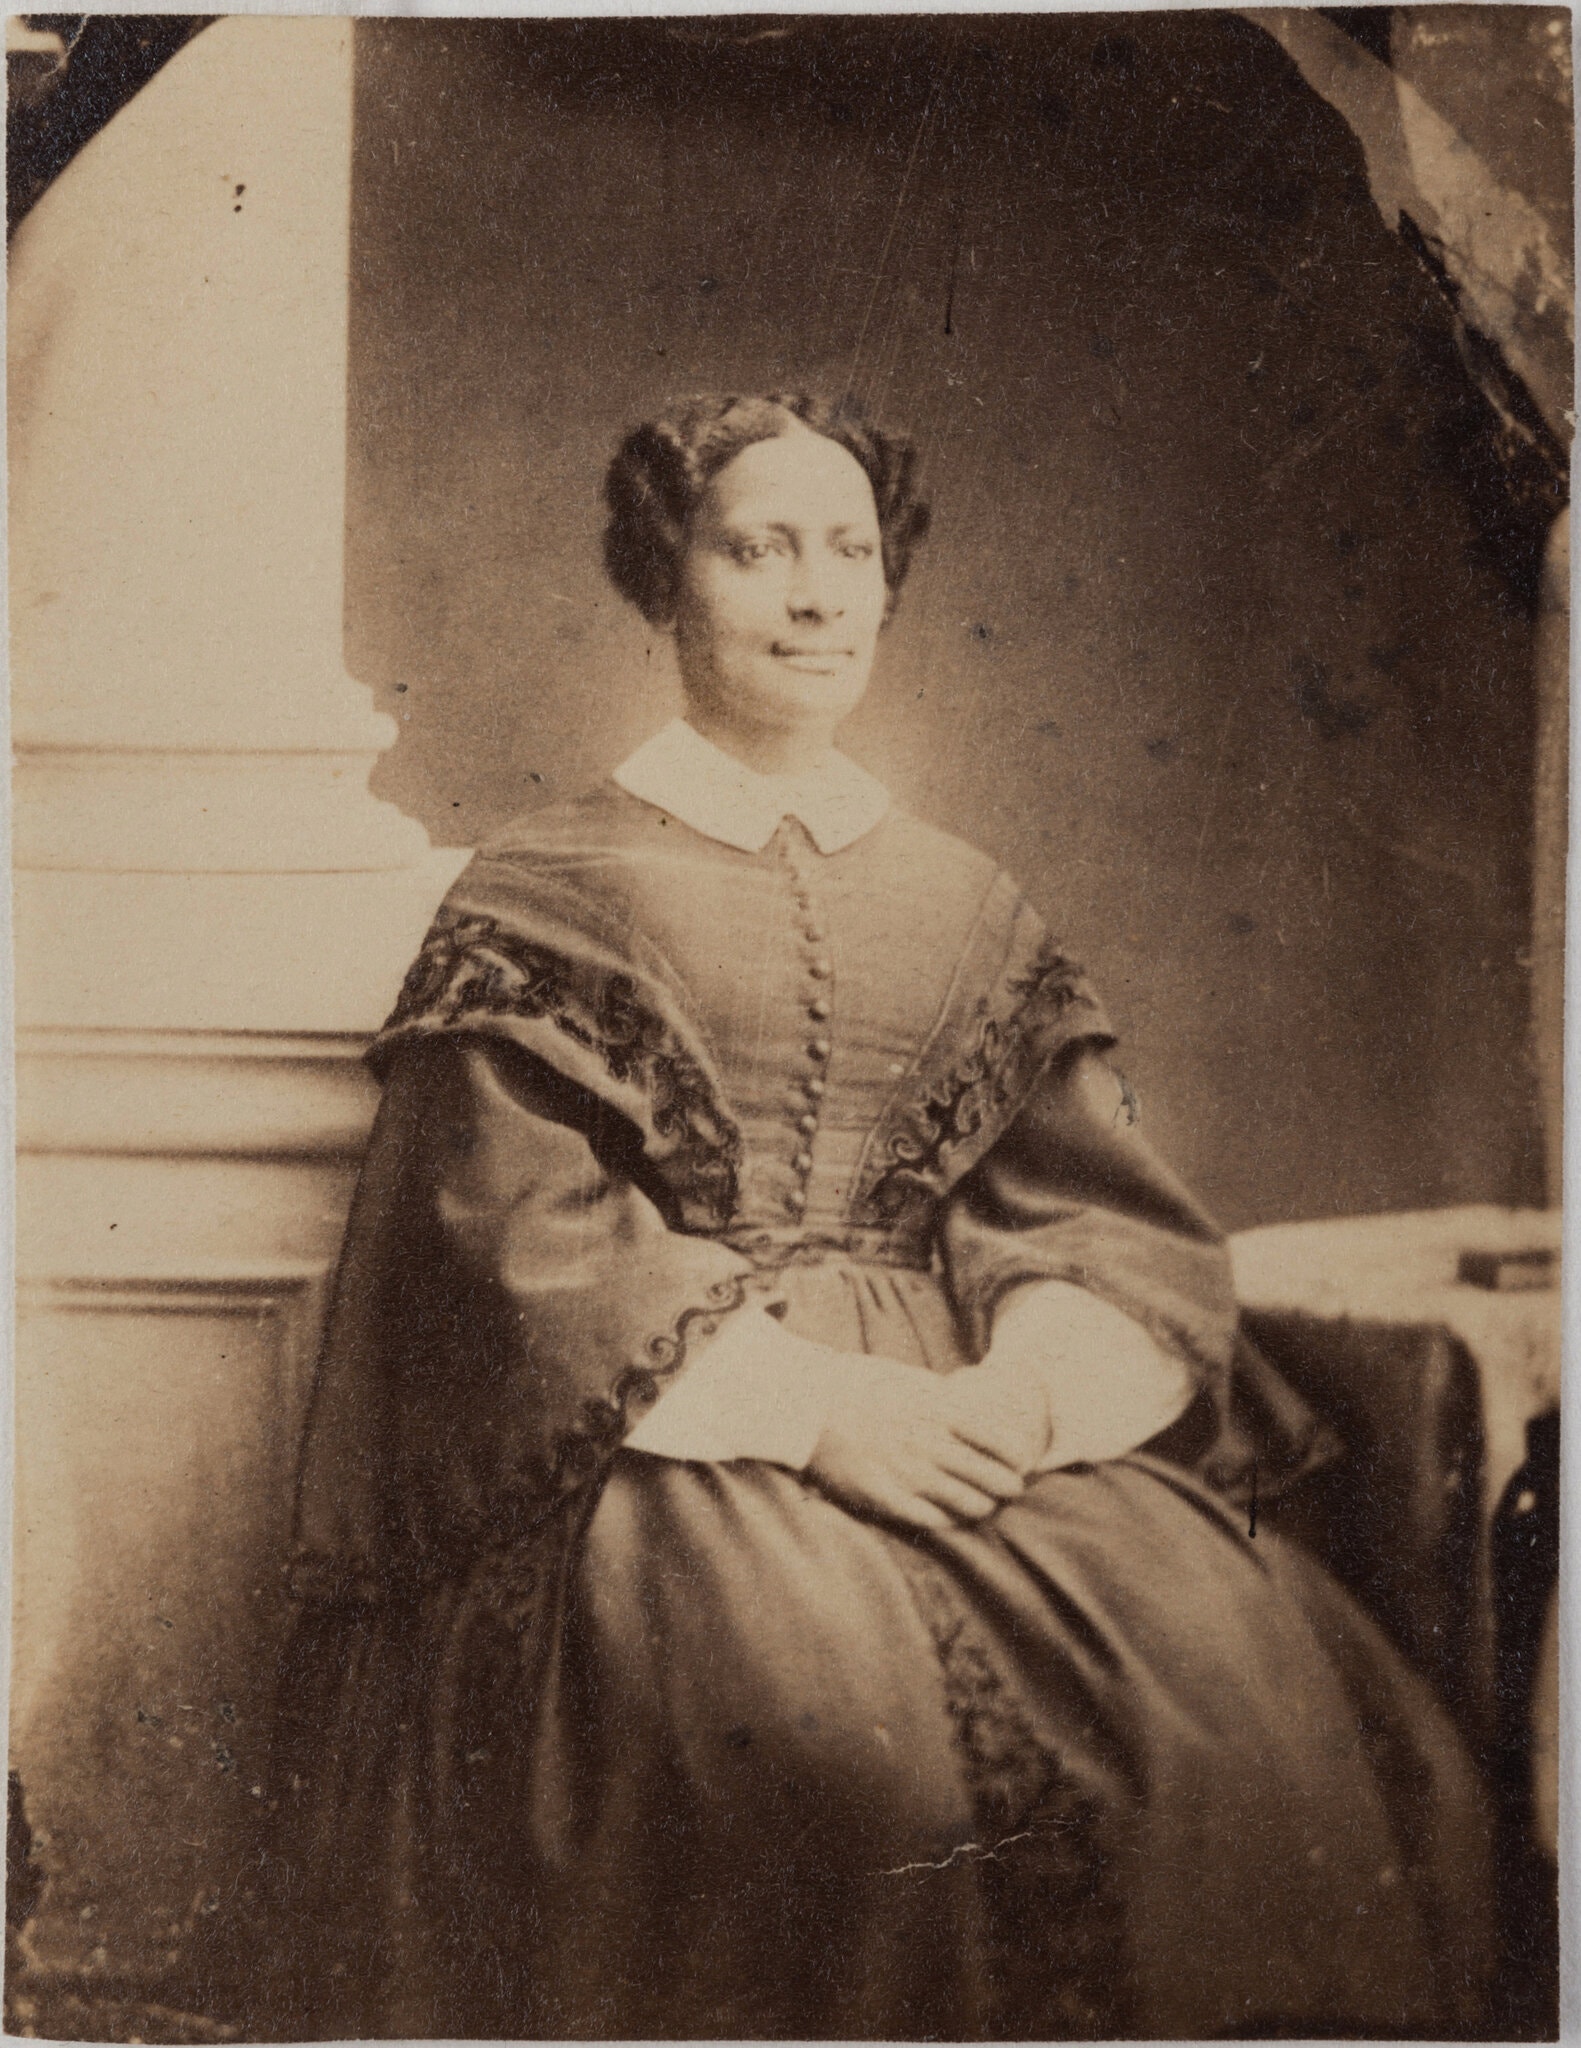 Old photograph of black Victorian woman, seated by a stone pillar, hair up, full skirted dress with embroidered hems and white collar.